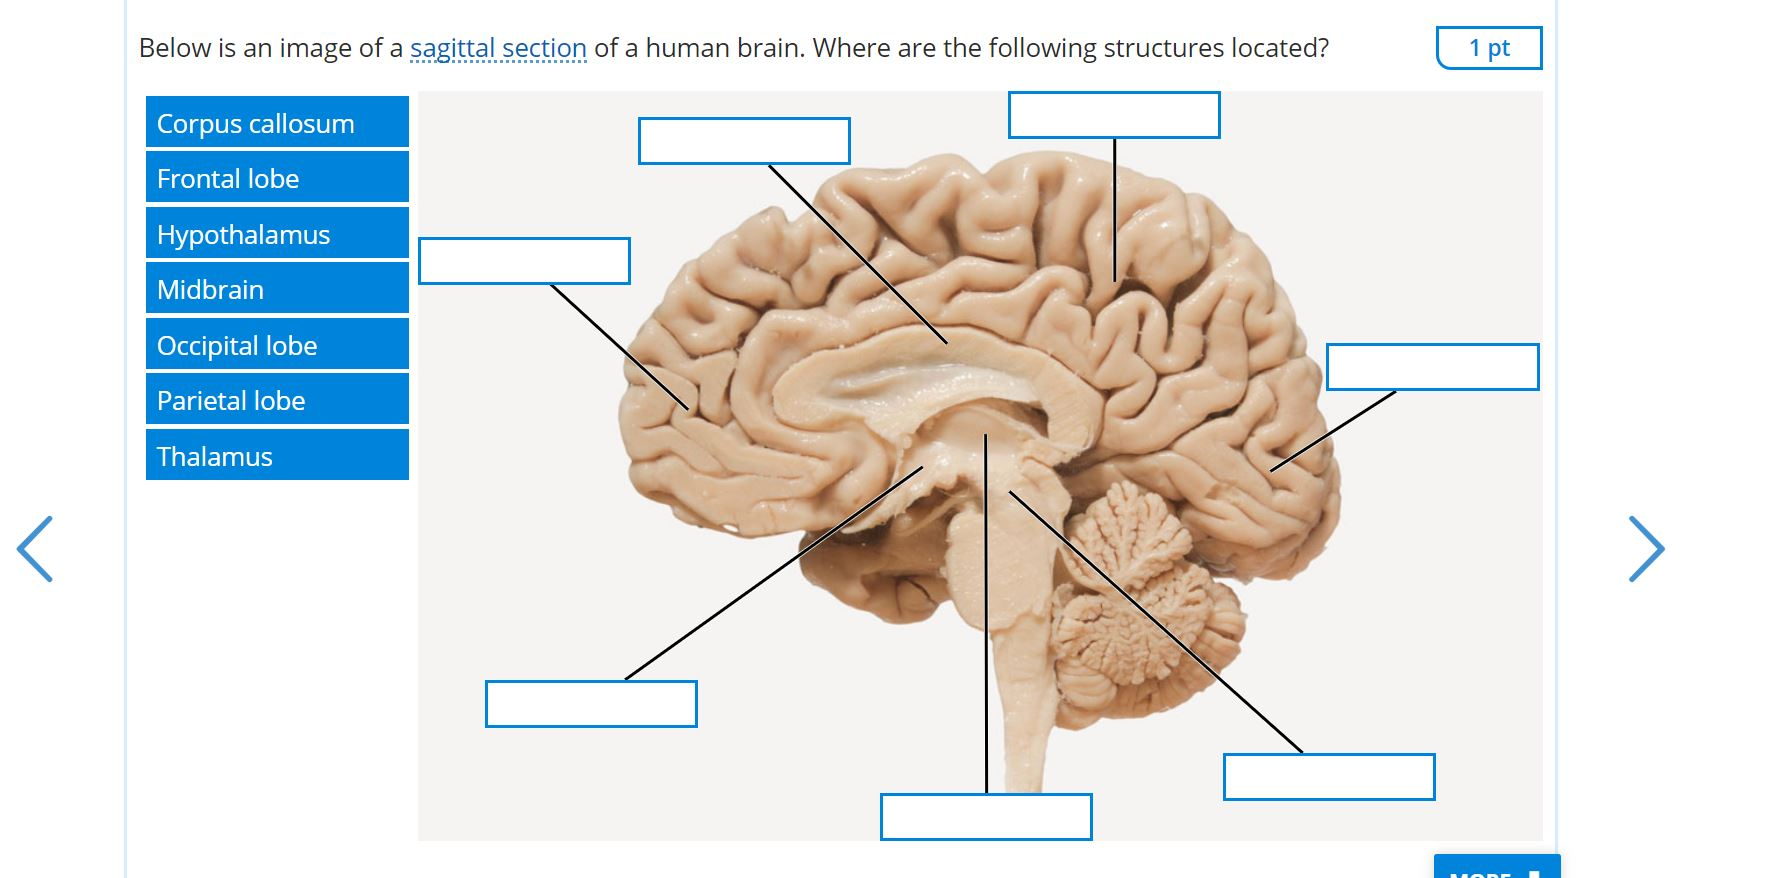 sagittal view of the human brain labeled